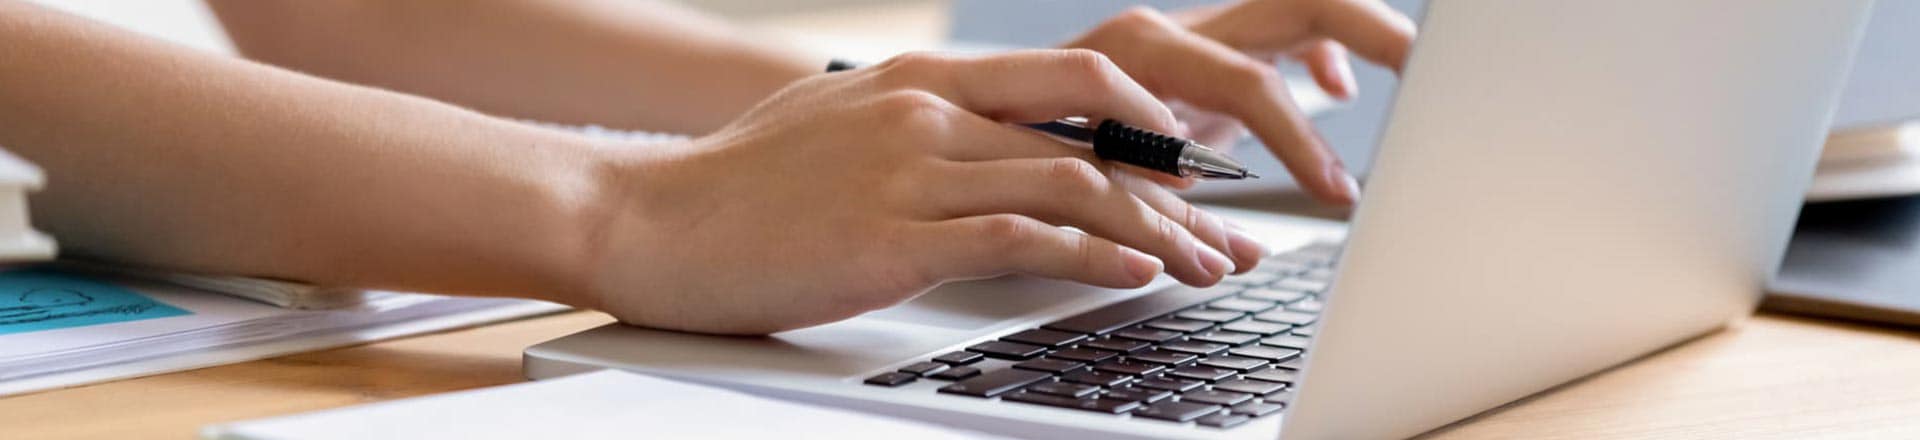 Person at desk, hands typing on laptop with pen in hand